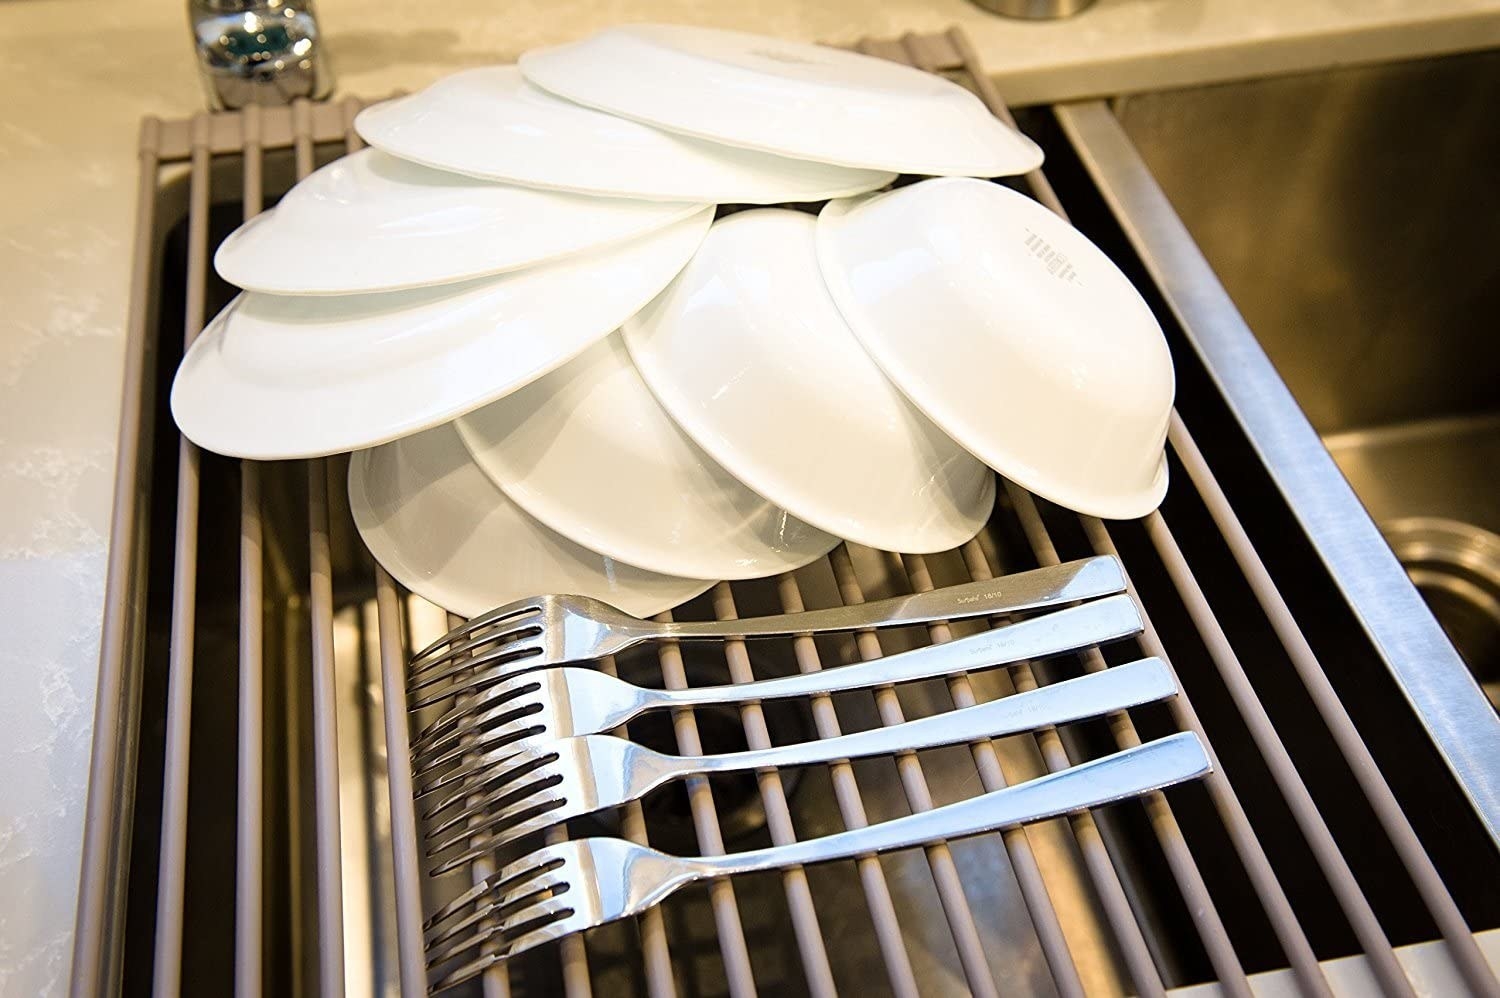 The roll out drying rack with plates, bowls, and forks drying over a sink